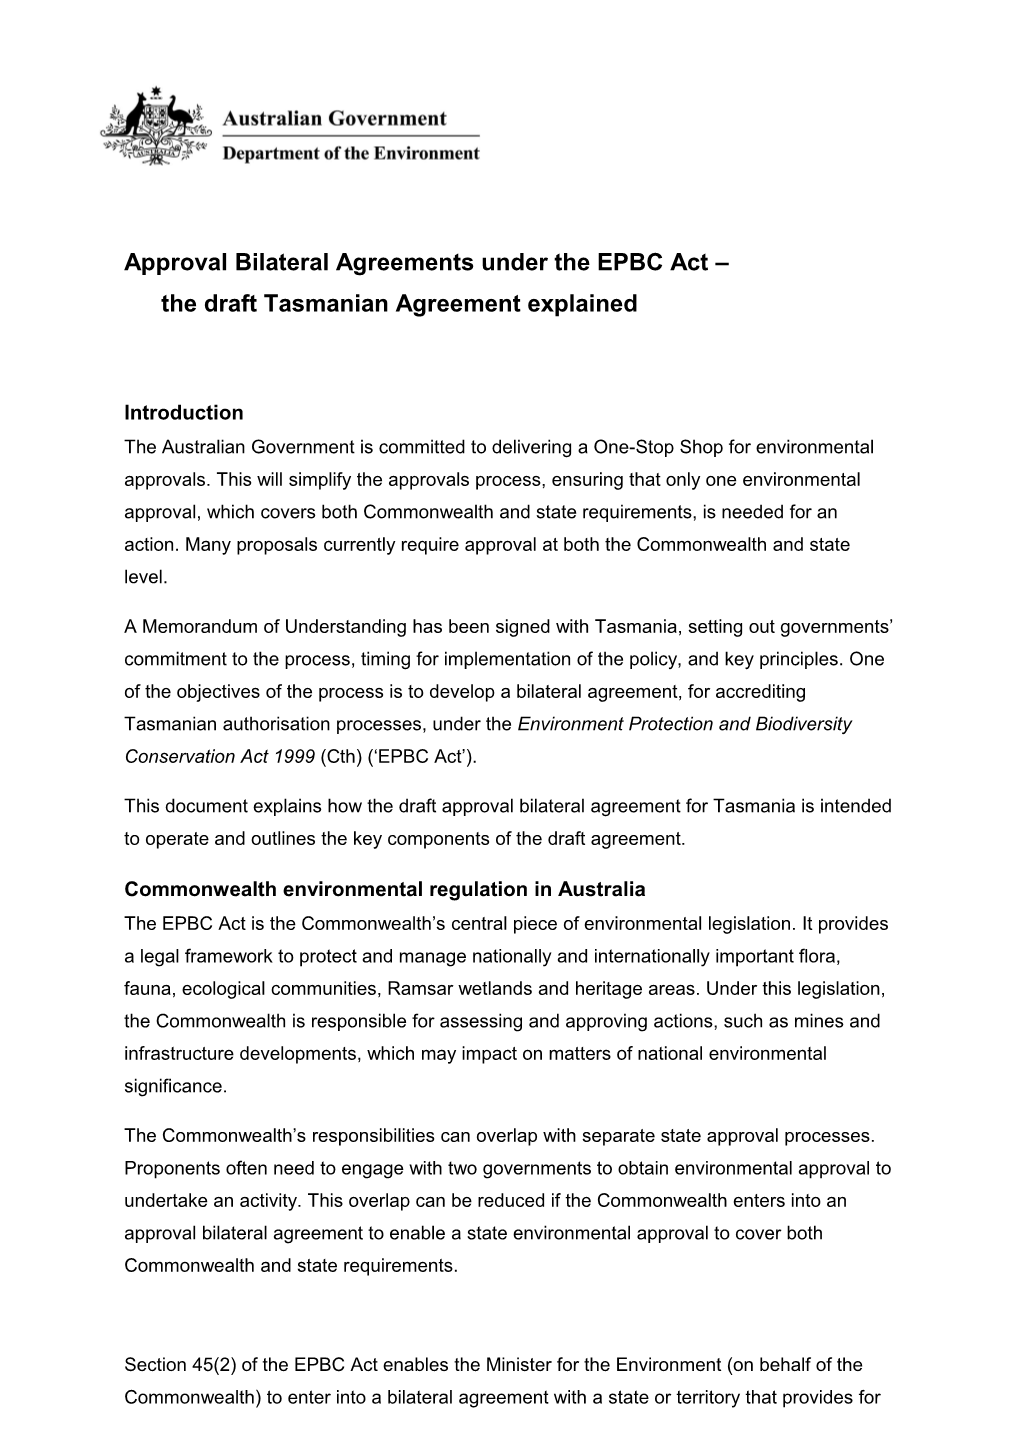 Approval Bilateral Agreements Under the EPBC Act the Tas Agreement Explained